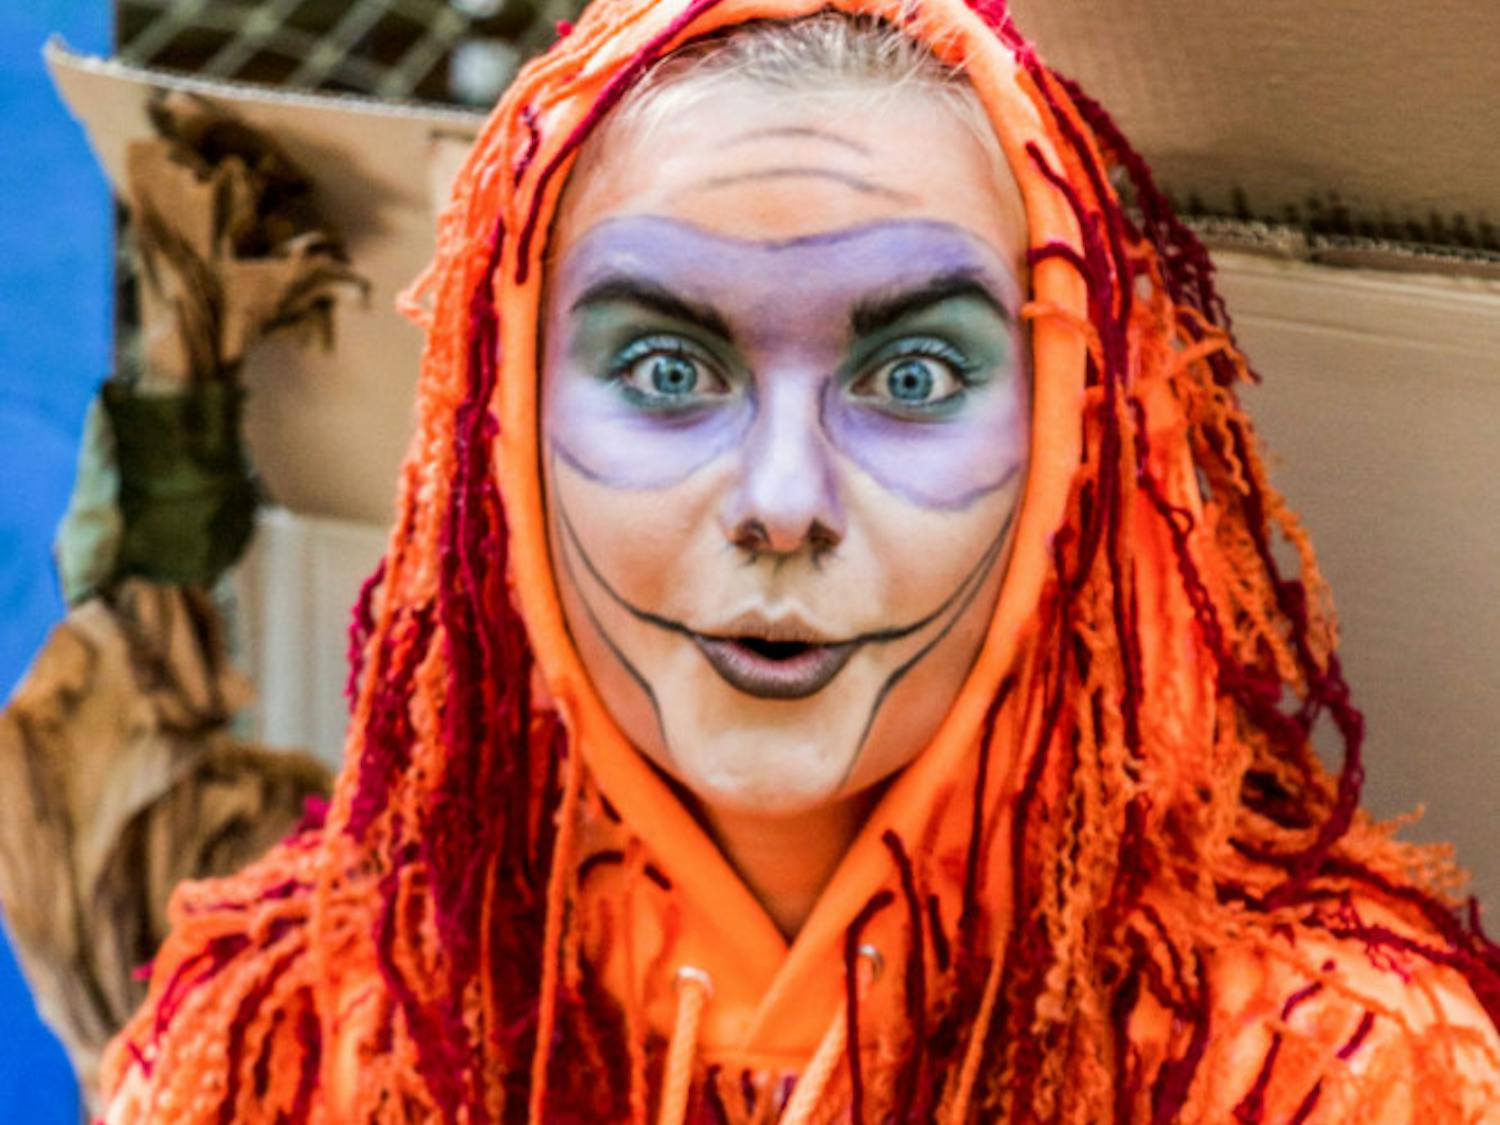 Raigen Sumrall, 19, a Santa Fe College zoology student, dresses as King Louie from “The Jungle Book” during Santa Fe’s Boo at the Zoo for Halloween on Monday afternoon. According to Santa Fe President Jackson Sasser, Boo at the Zoo happens every year on Halloween and draws about 6,000 attendees.